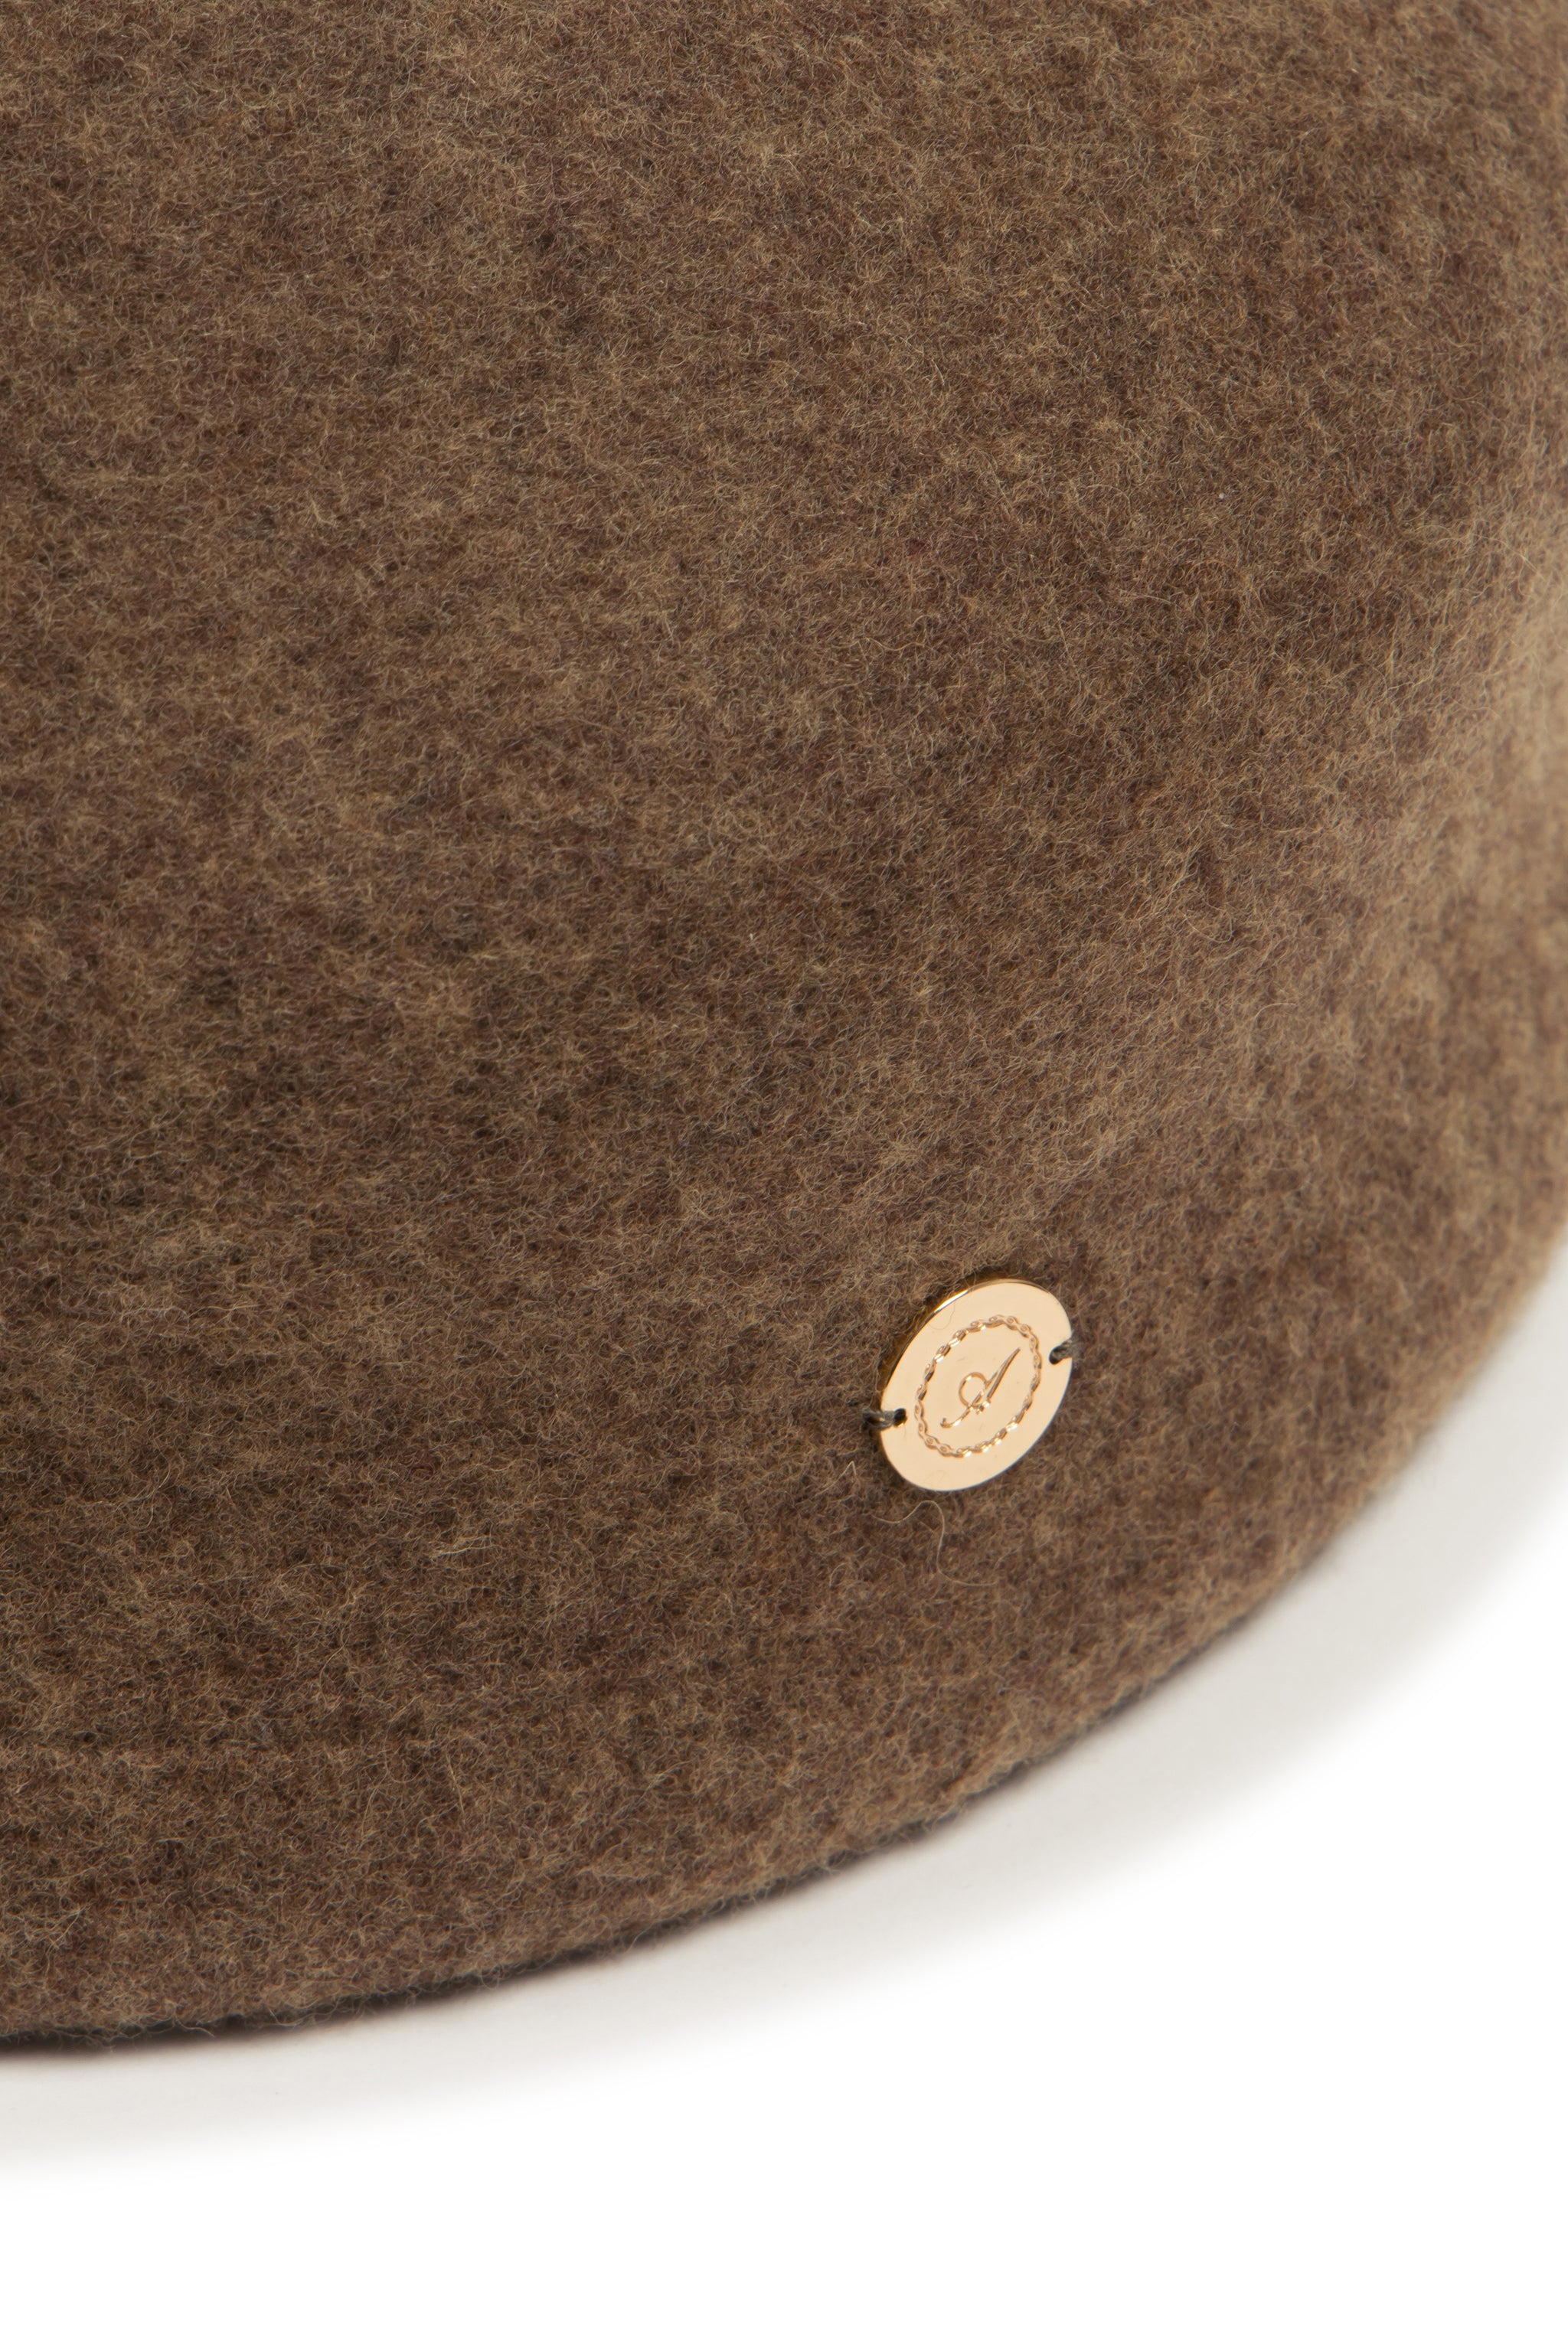 Pure Wool Beret (Forest)